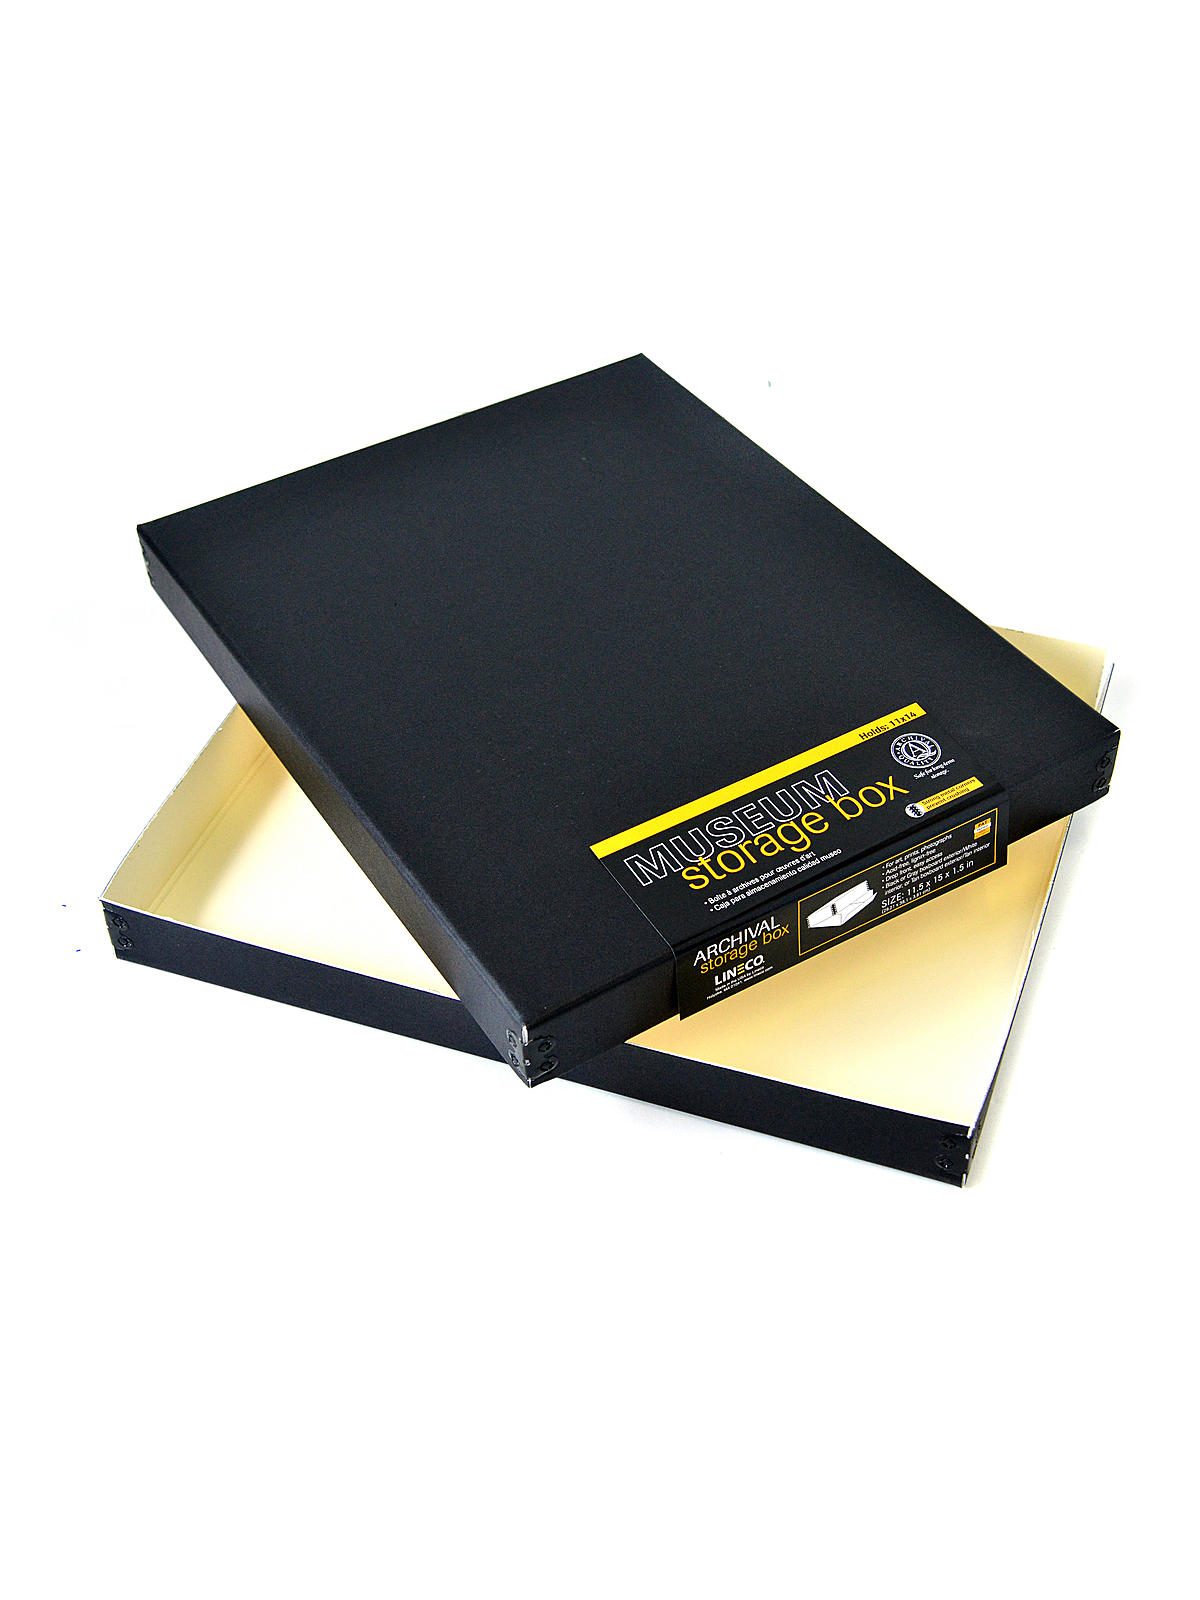 Drop-front Storage Boxes Black 11 In. X 14 In. X 1 1 2 In.